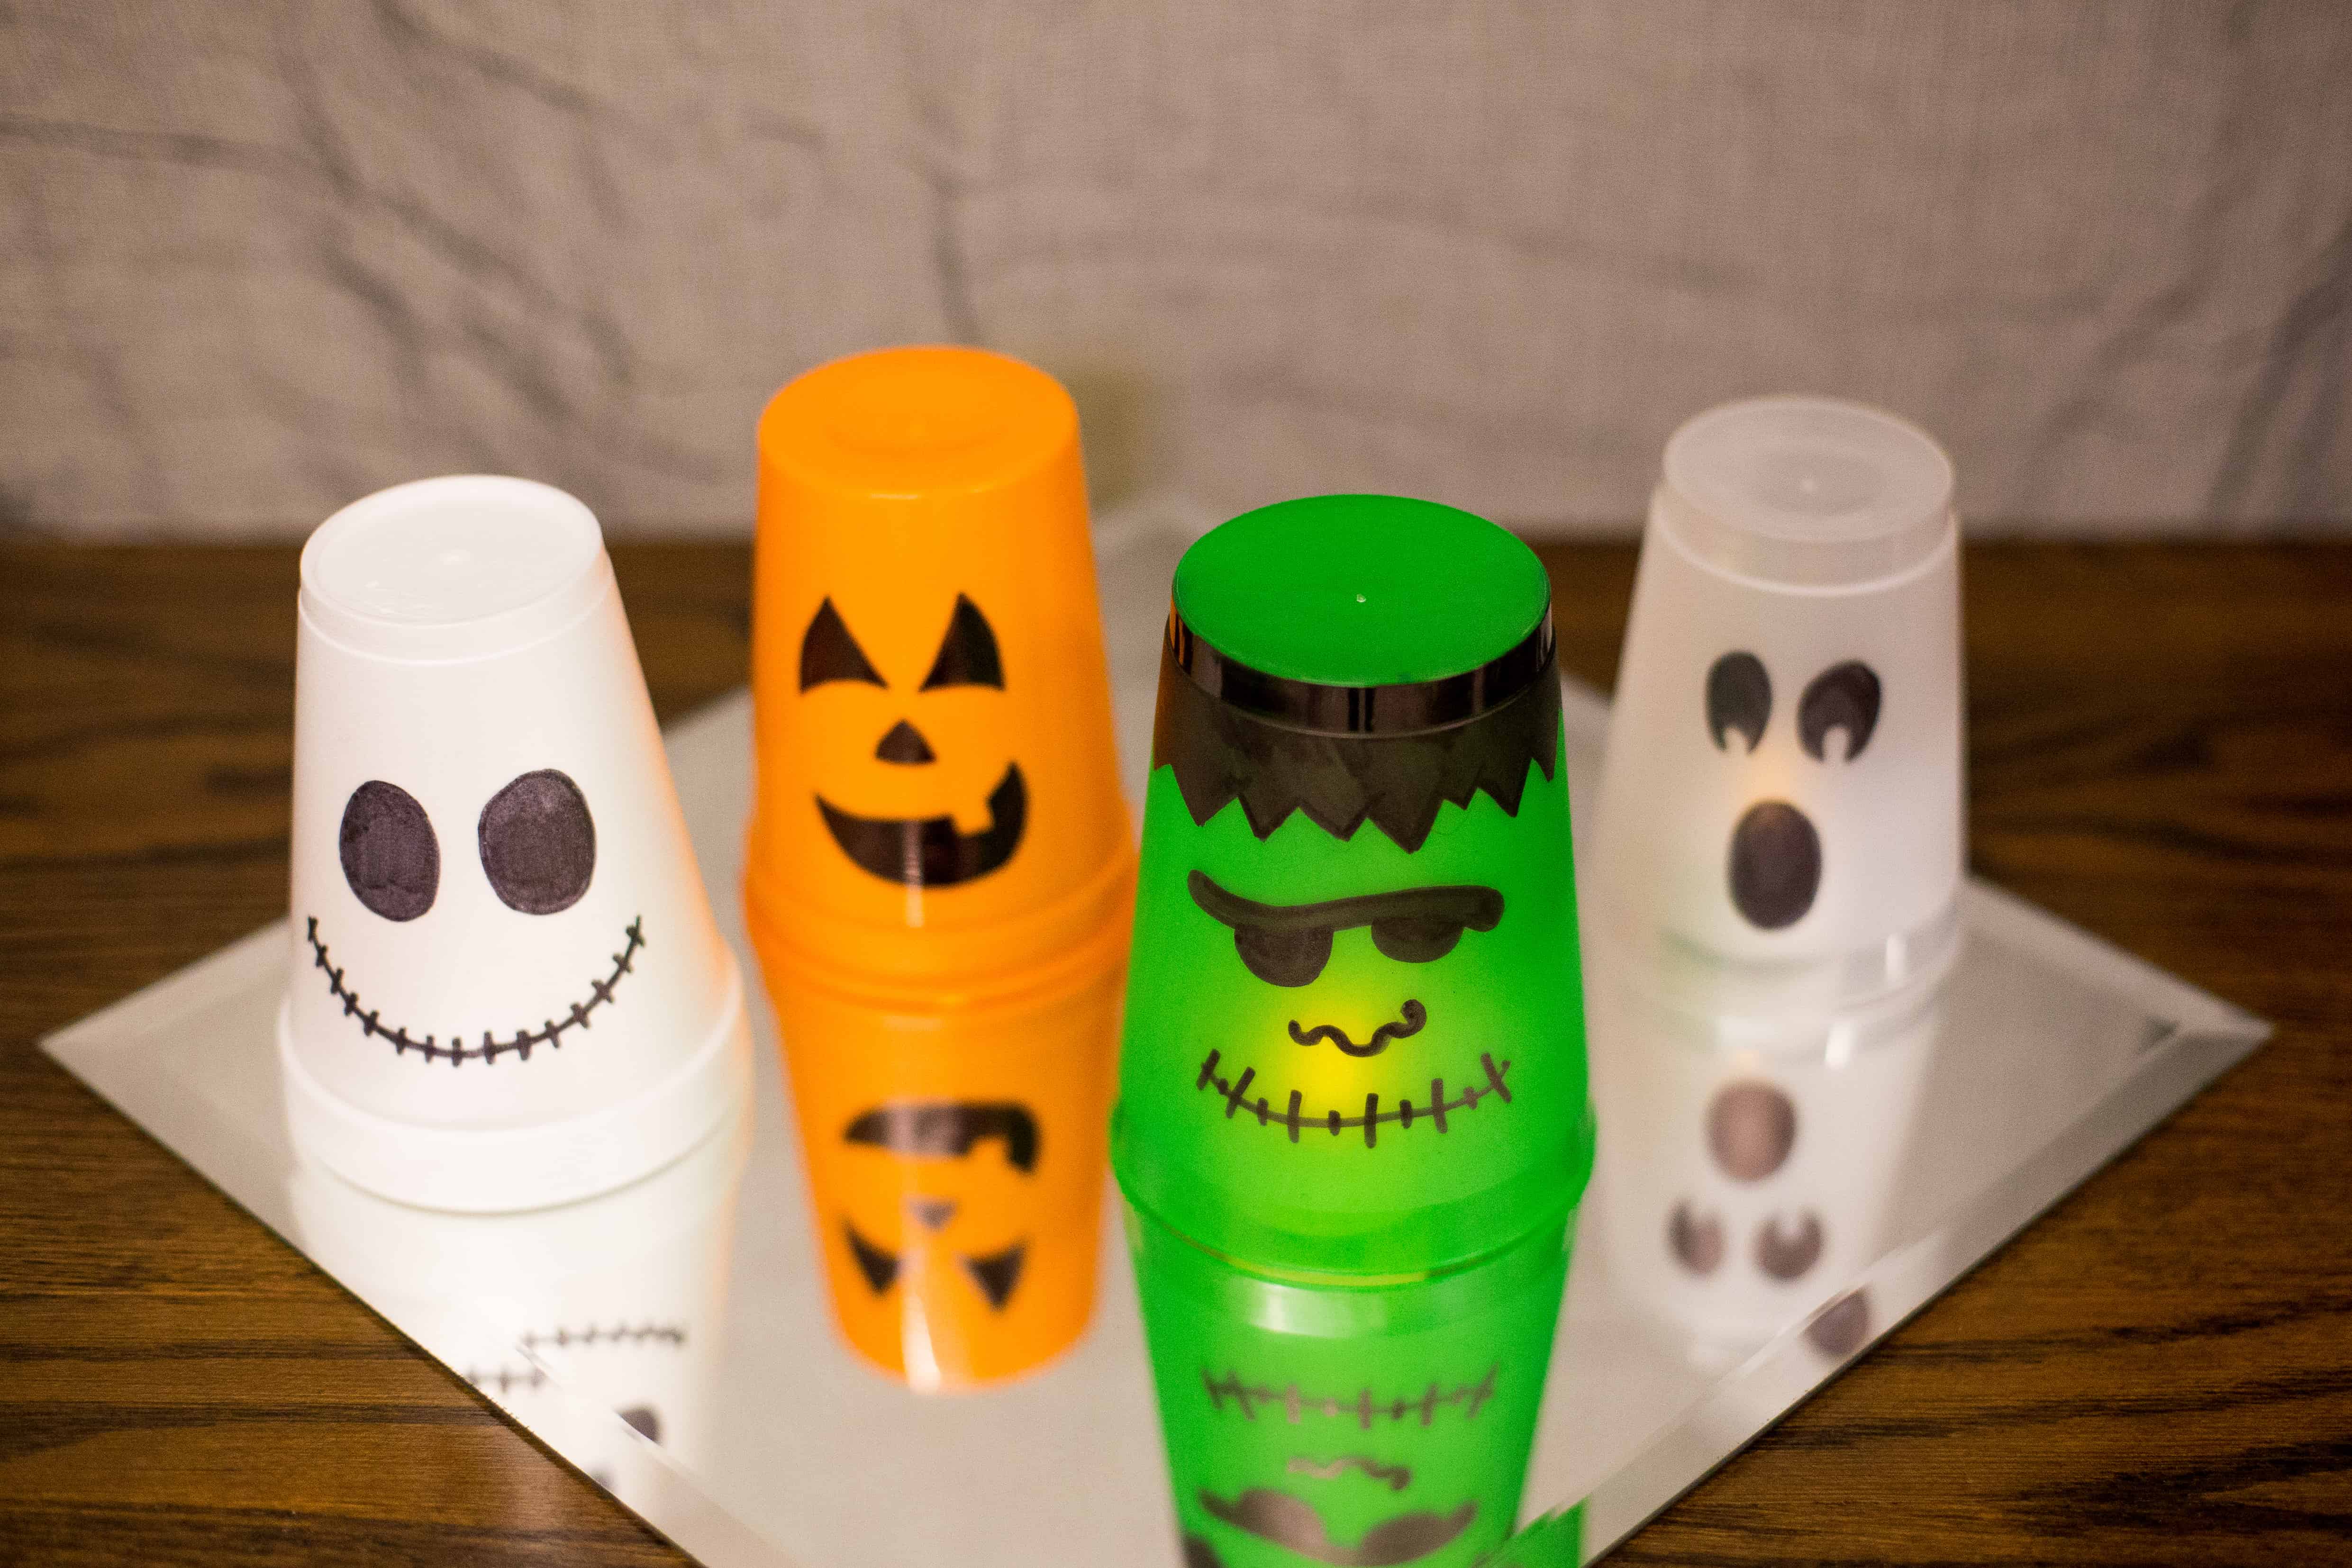 Halloween crafts with blank promo items